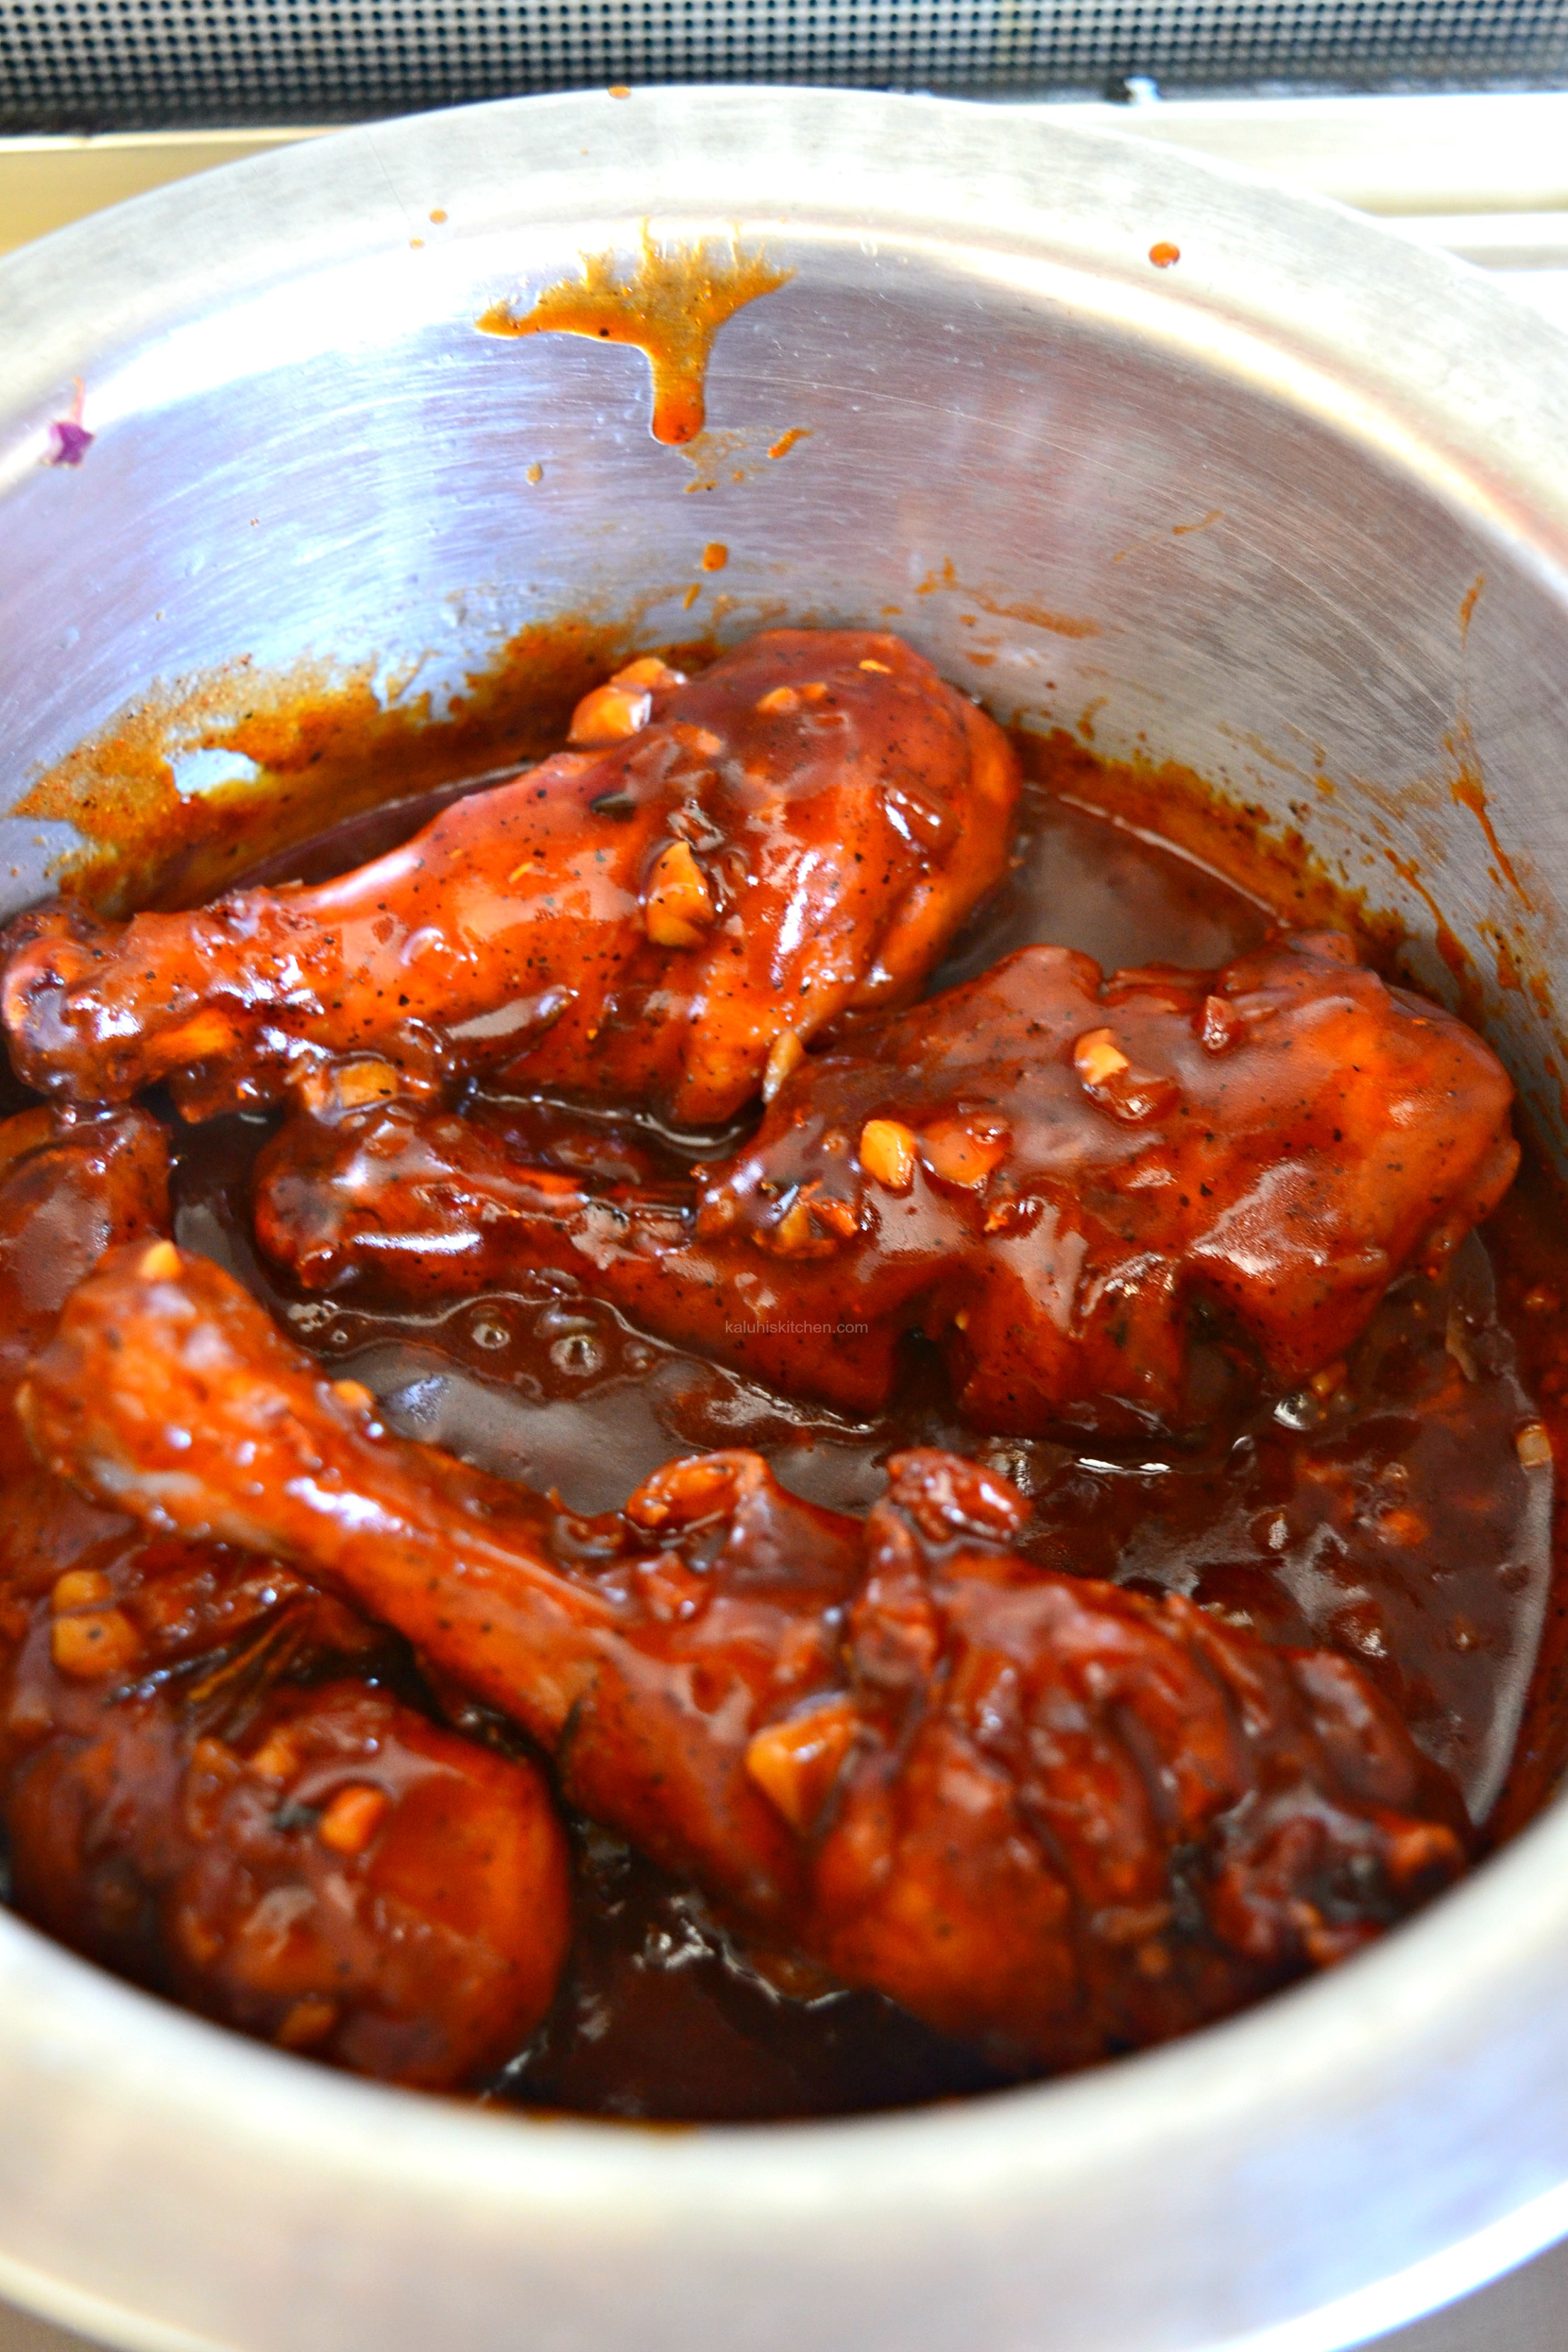 allow-your-drumsticks-to-simmer-down-in-the-sauce-for-about-3-5-minutes-so-that-all-flavors-meld-andeverything-comes-together_kaluhiskitchen-com_guinness-recipes